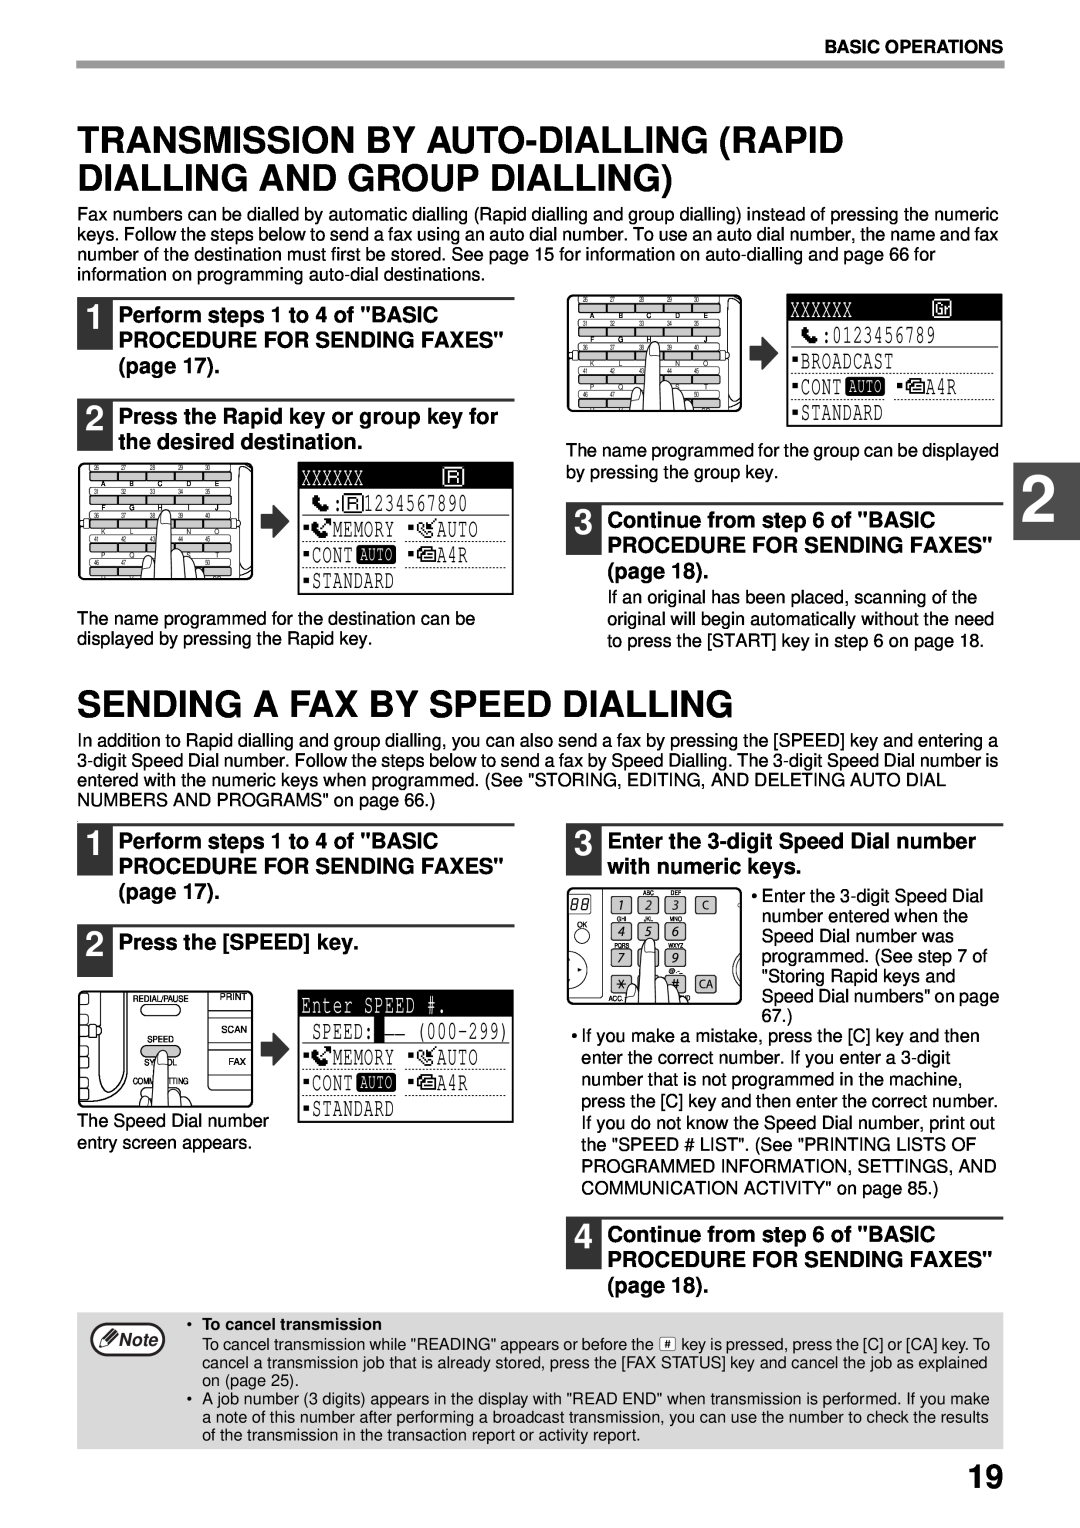 Sharp MX-FX13 Transmission By Auto-Dialling Rapid Dialling And Group Dialling, Sending A Fax By Speed Dialling, Xxxxxx 